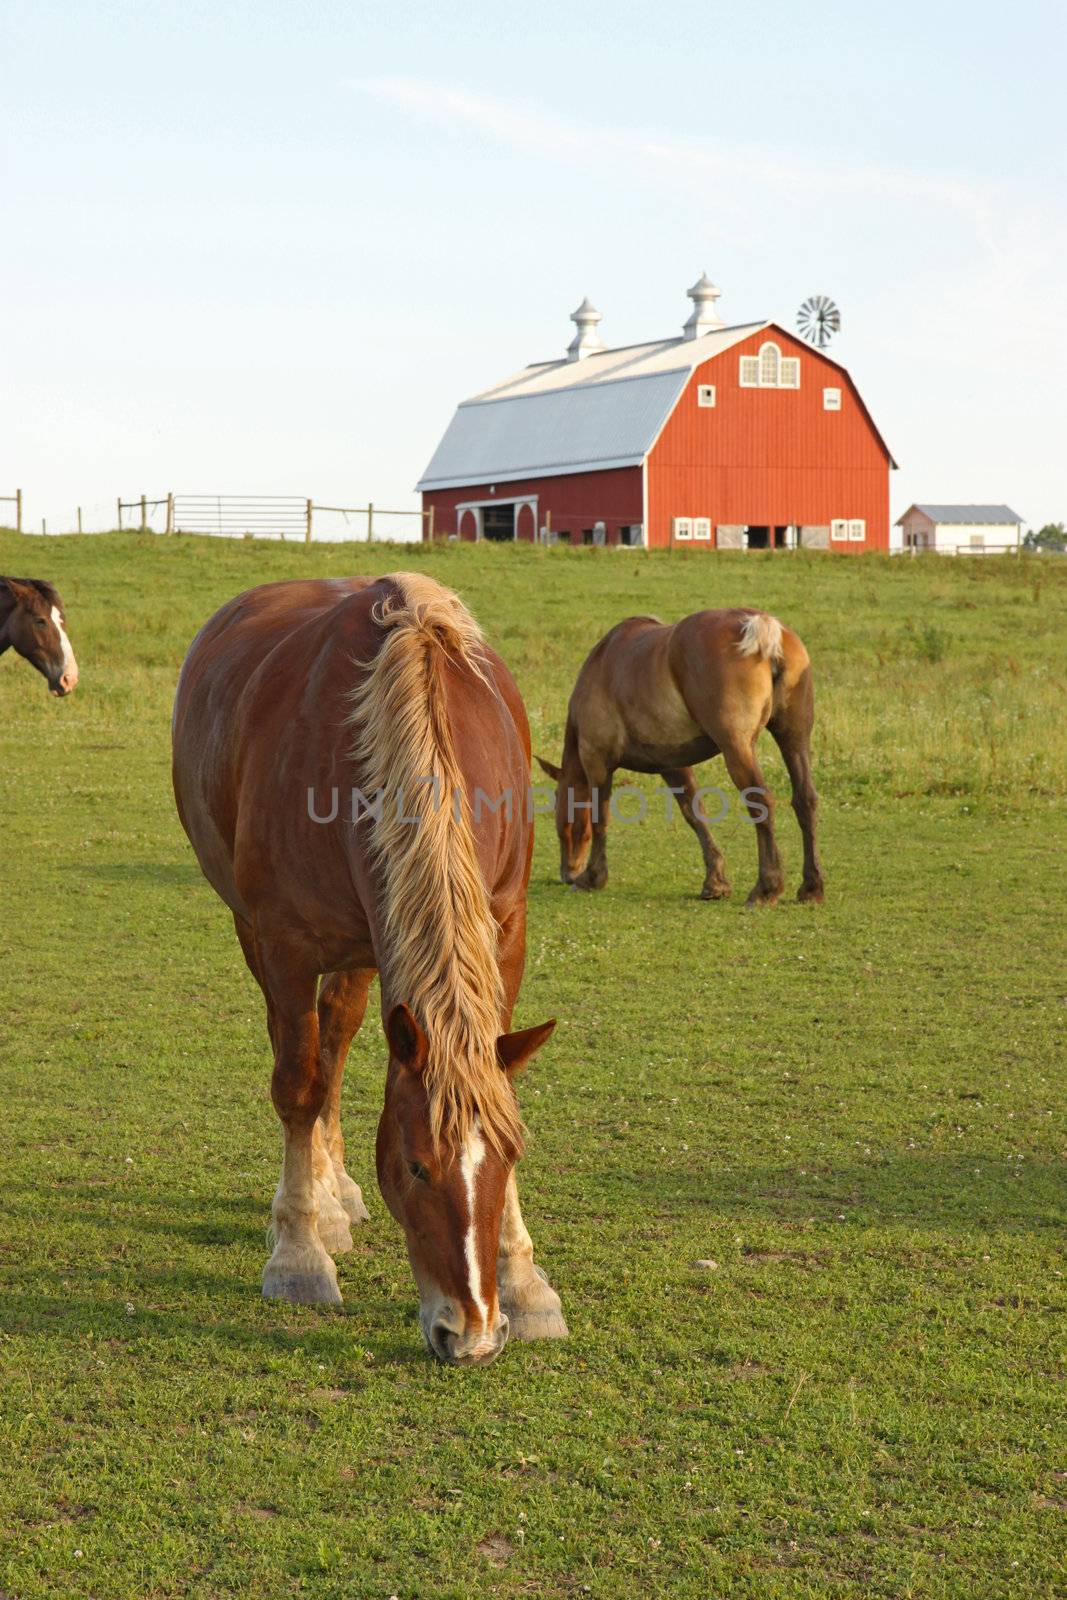 Horses and a barn vertical by sgoodwin4813